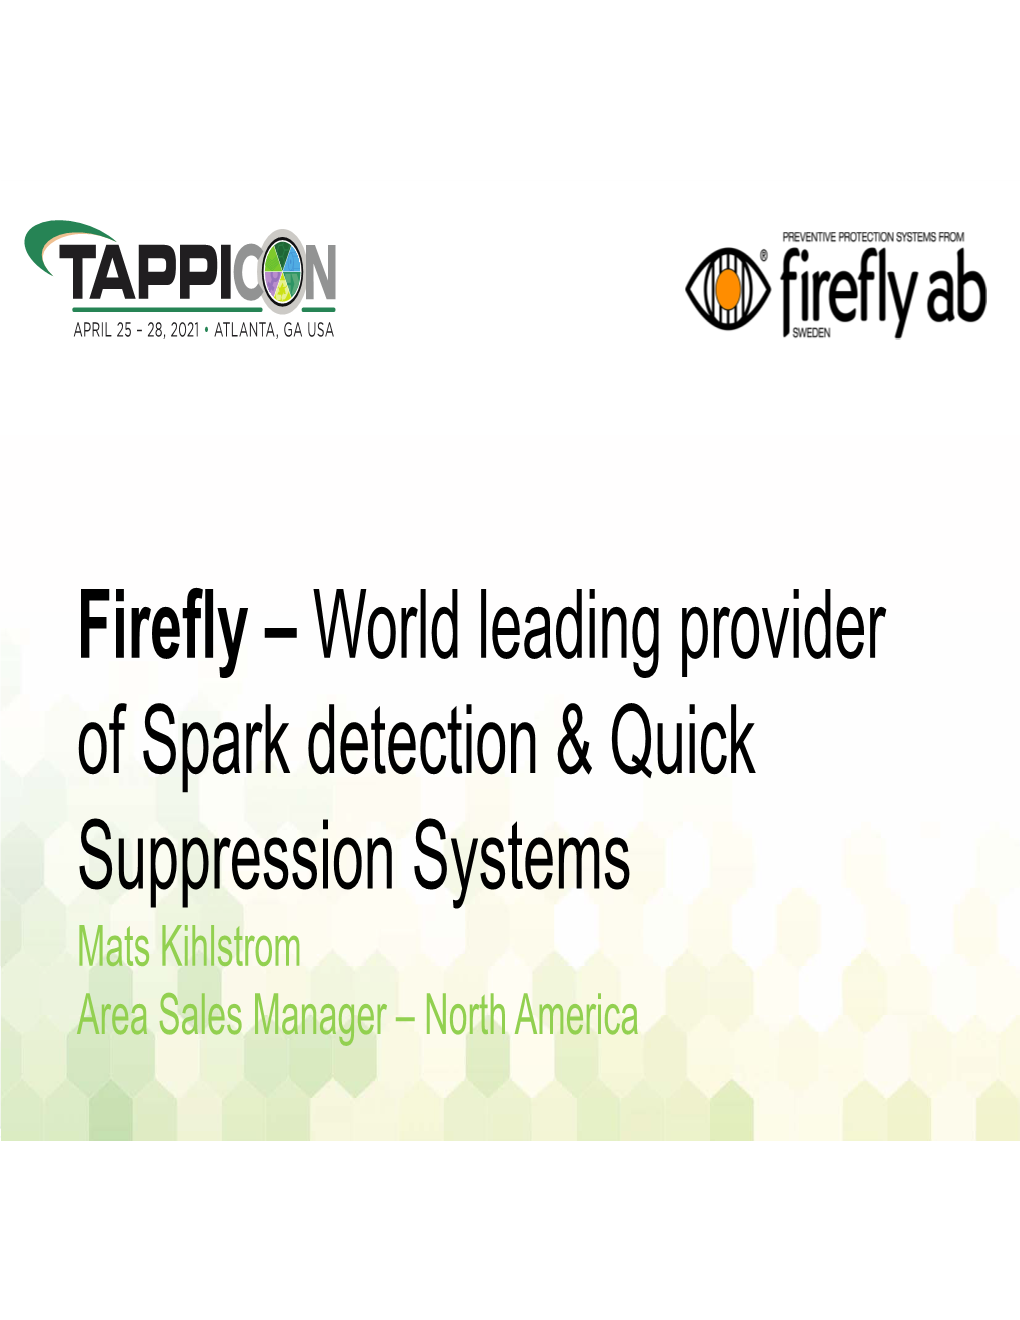 Firefly – World Leading Provider of Spark Detection & Quick